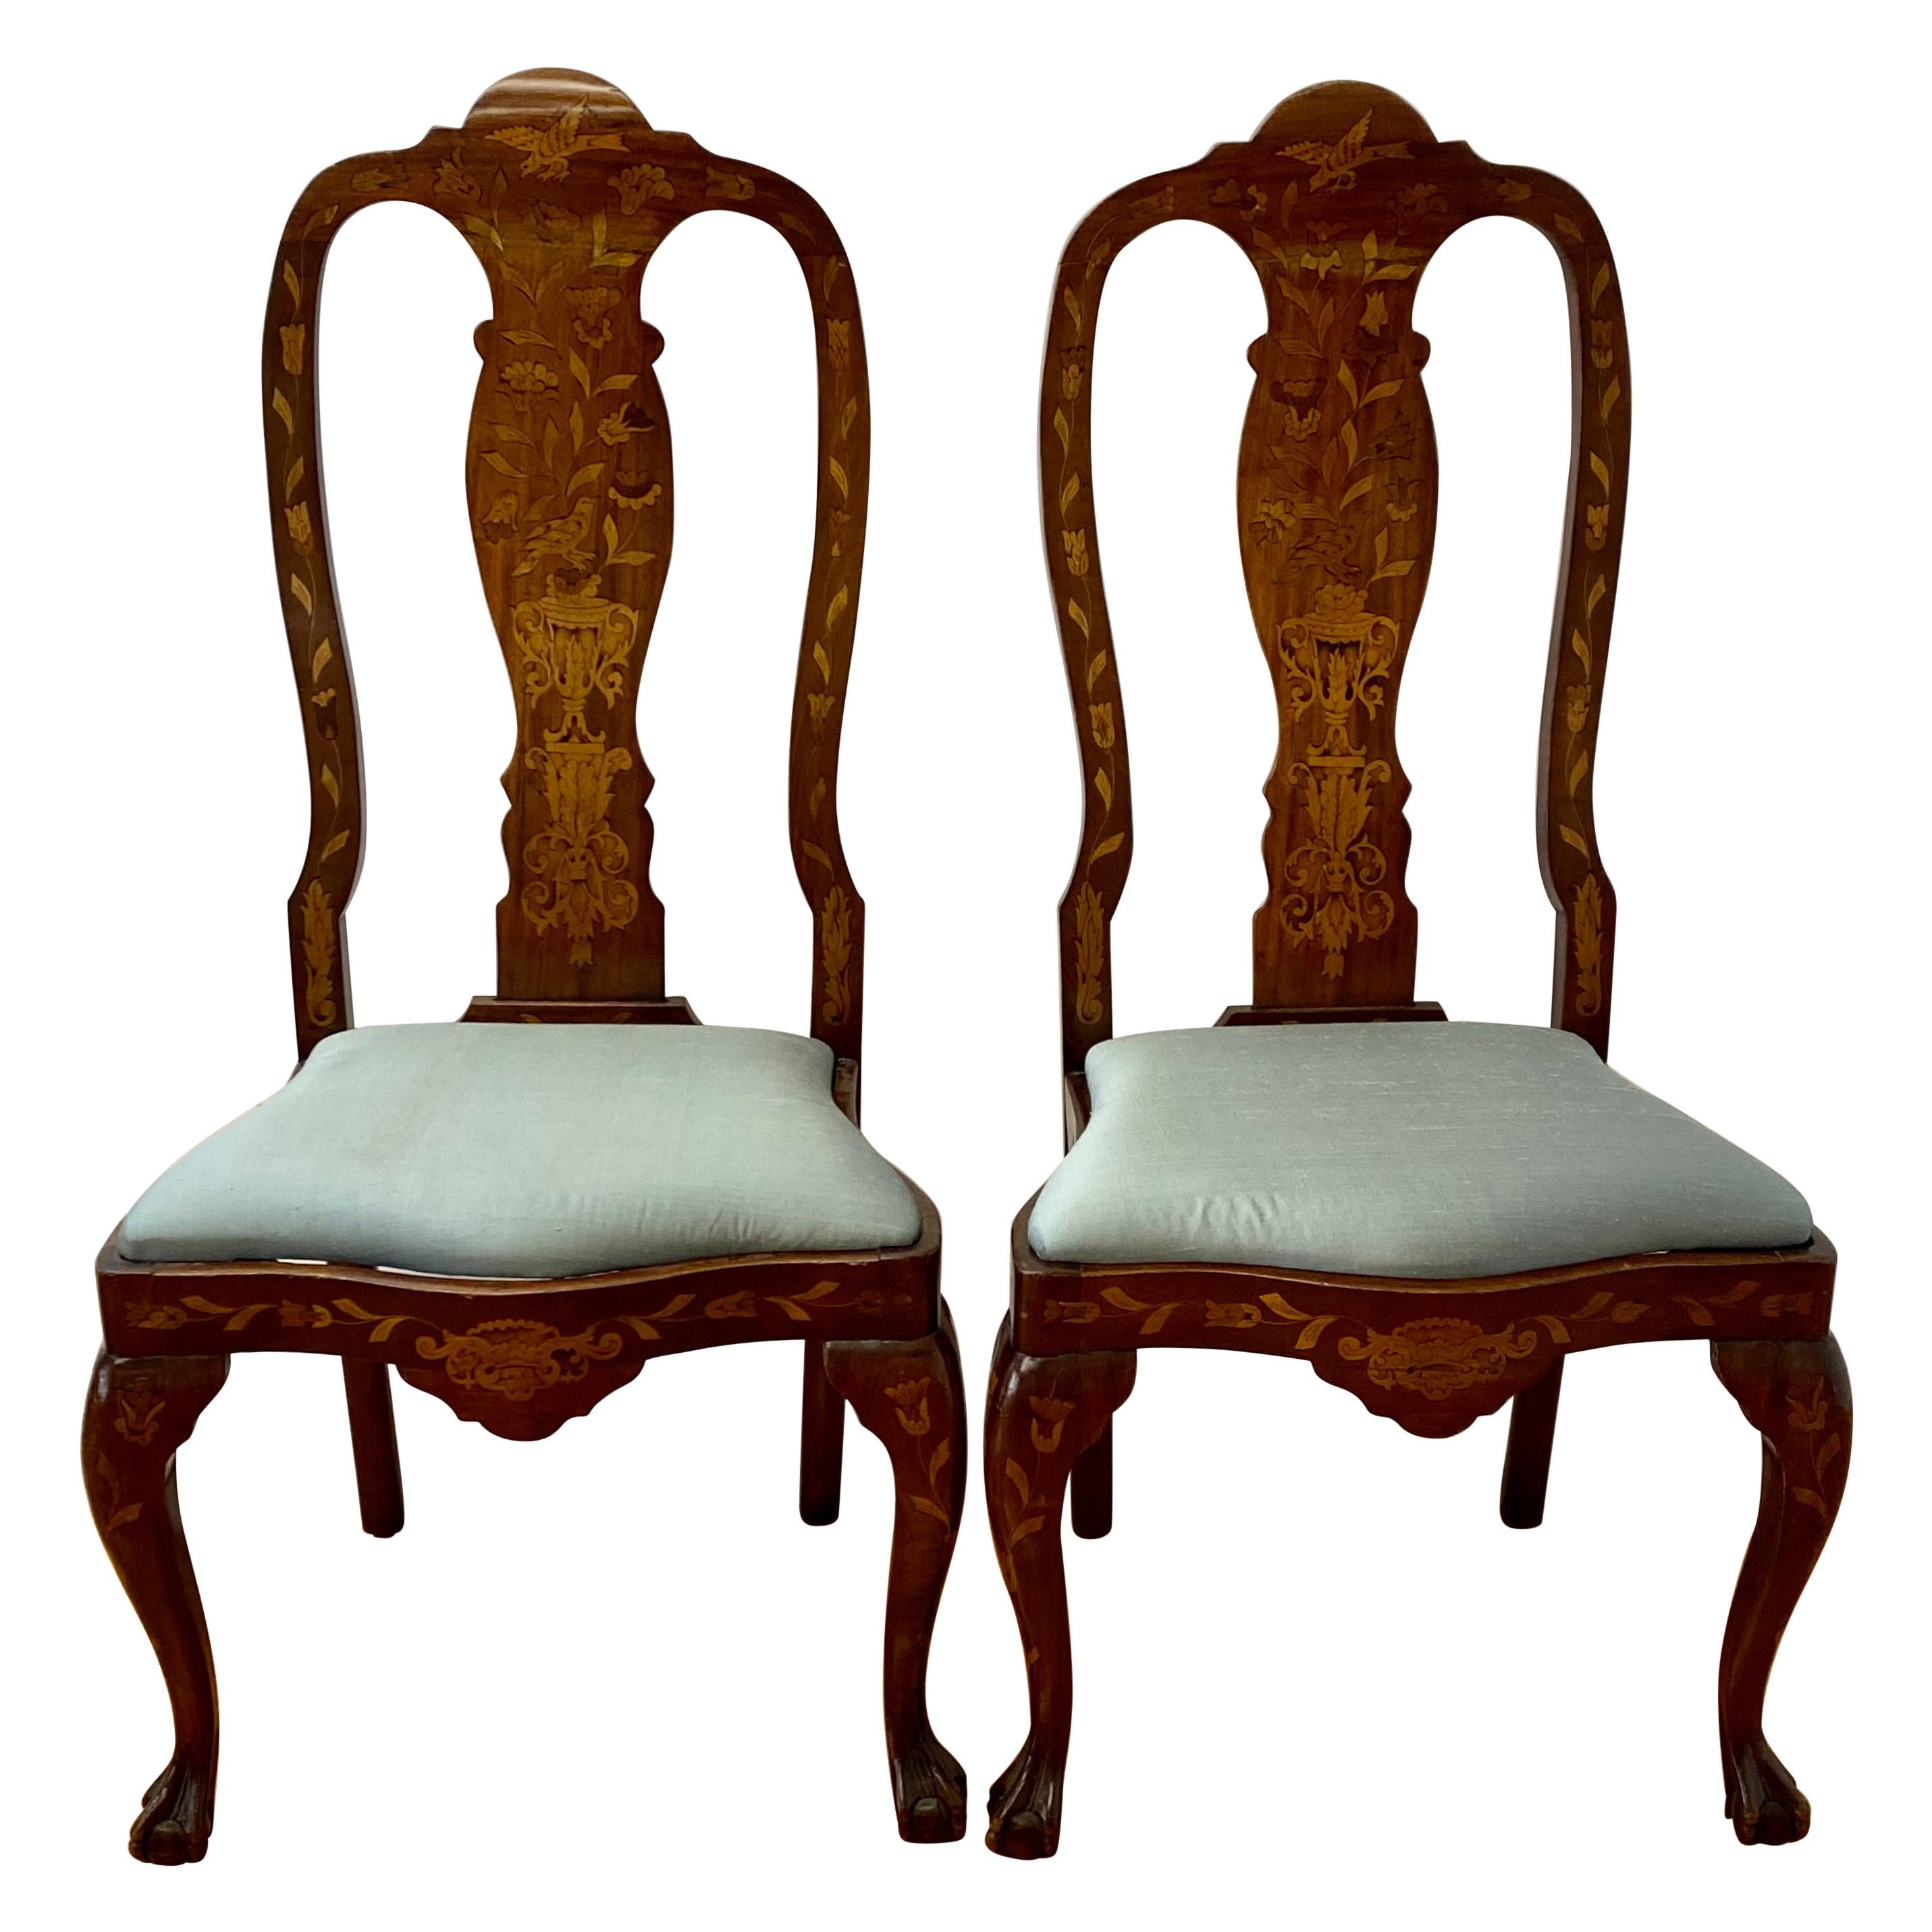 Pair of Early 20th Century Inlaid Chippendale Style Side Chairs